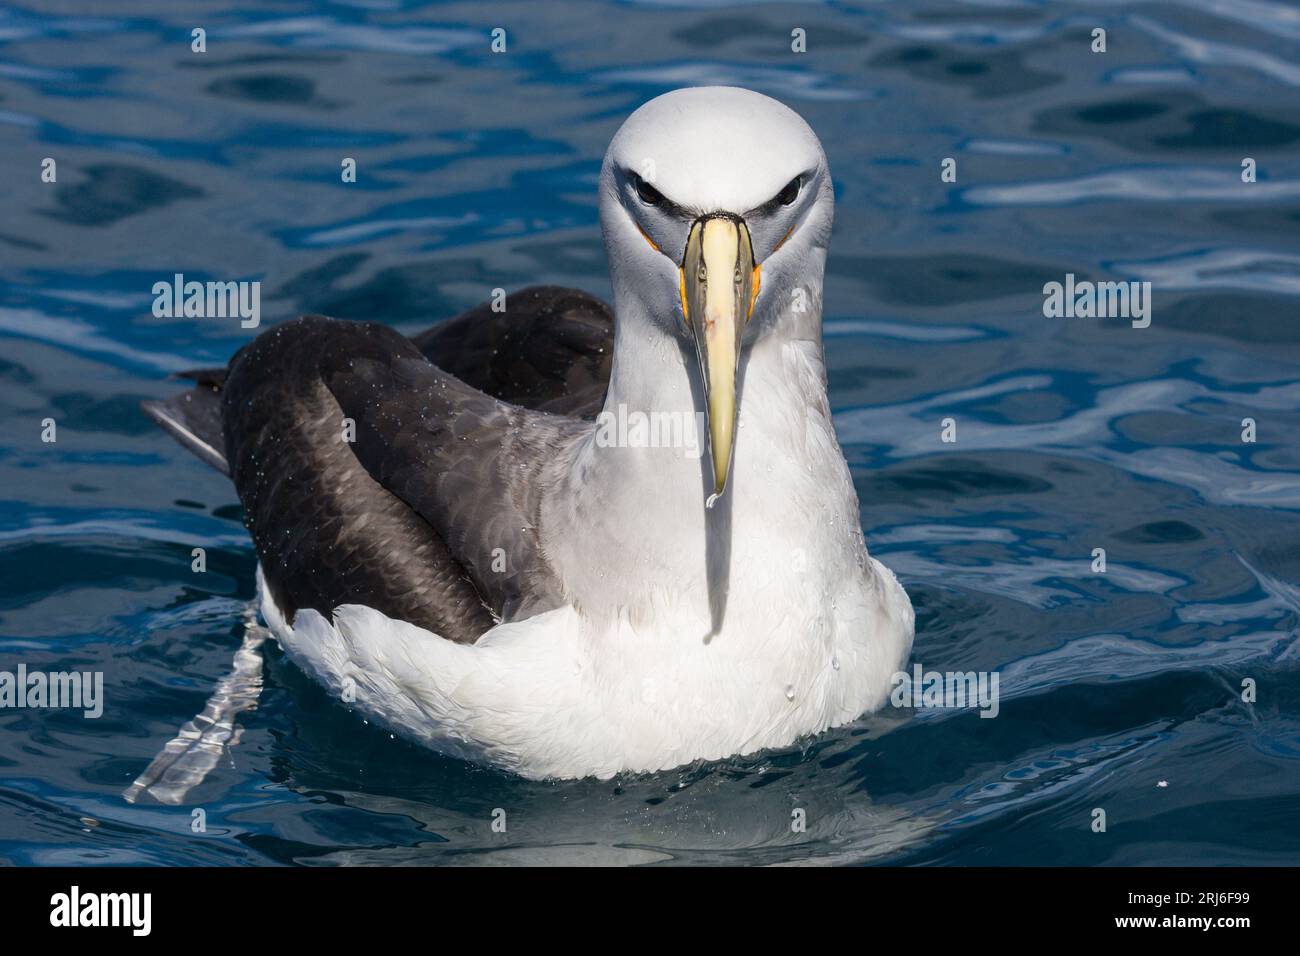 The threatened Salvin's albatross, or mollymawk, has a very striking appearance. The markings on its face give the appearance of a mask. Taken of the Stock Photo